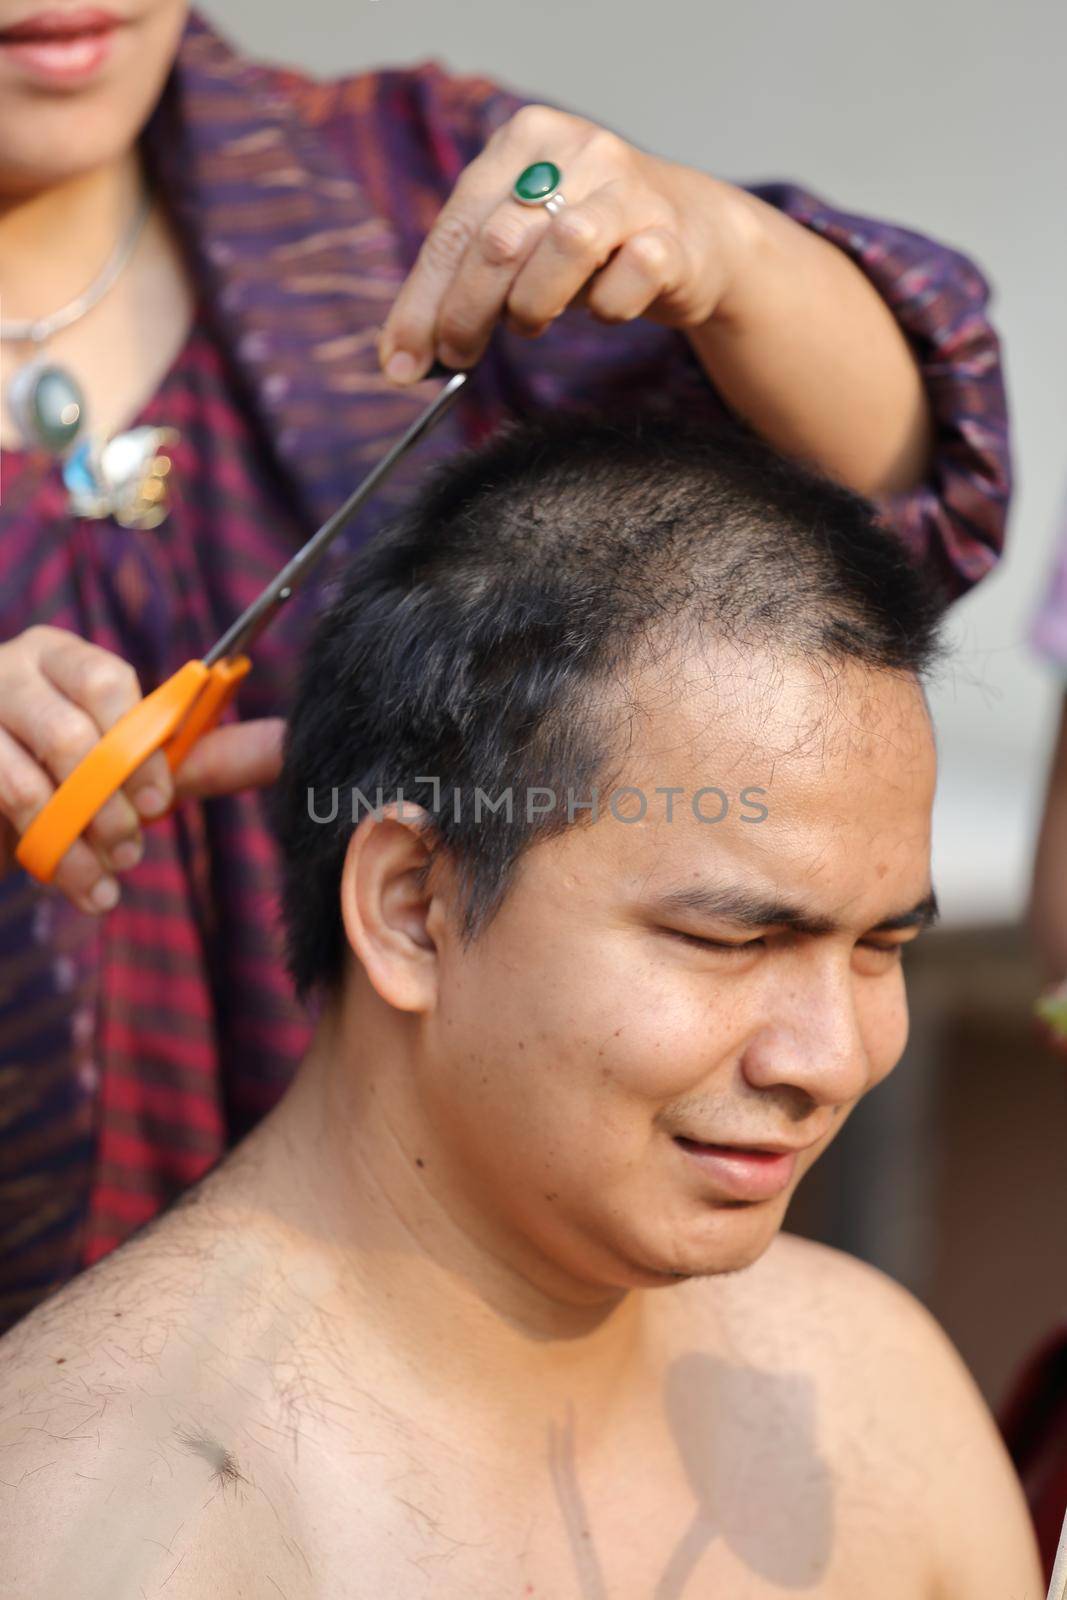 Male who will be monk cut hair for be Ordained to new monk